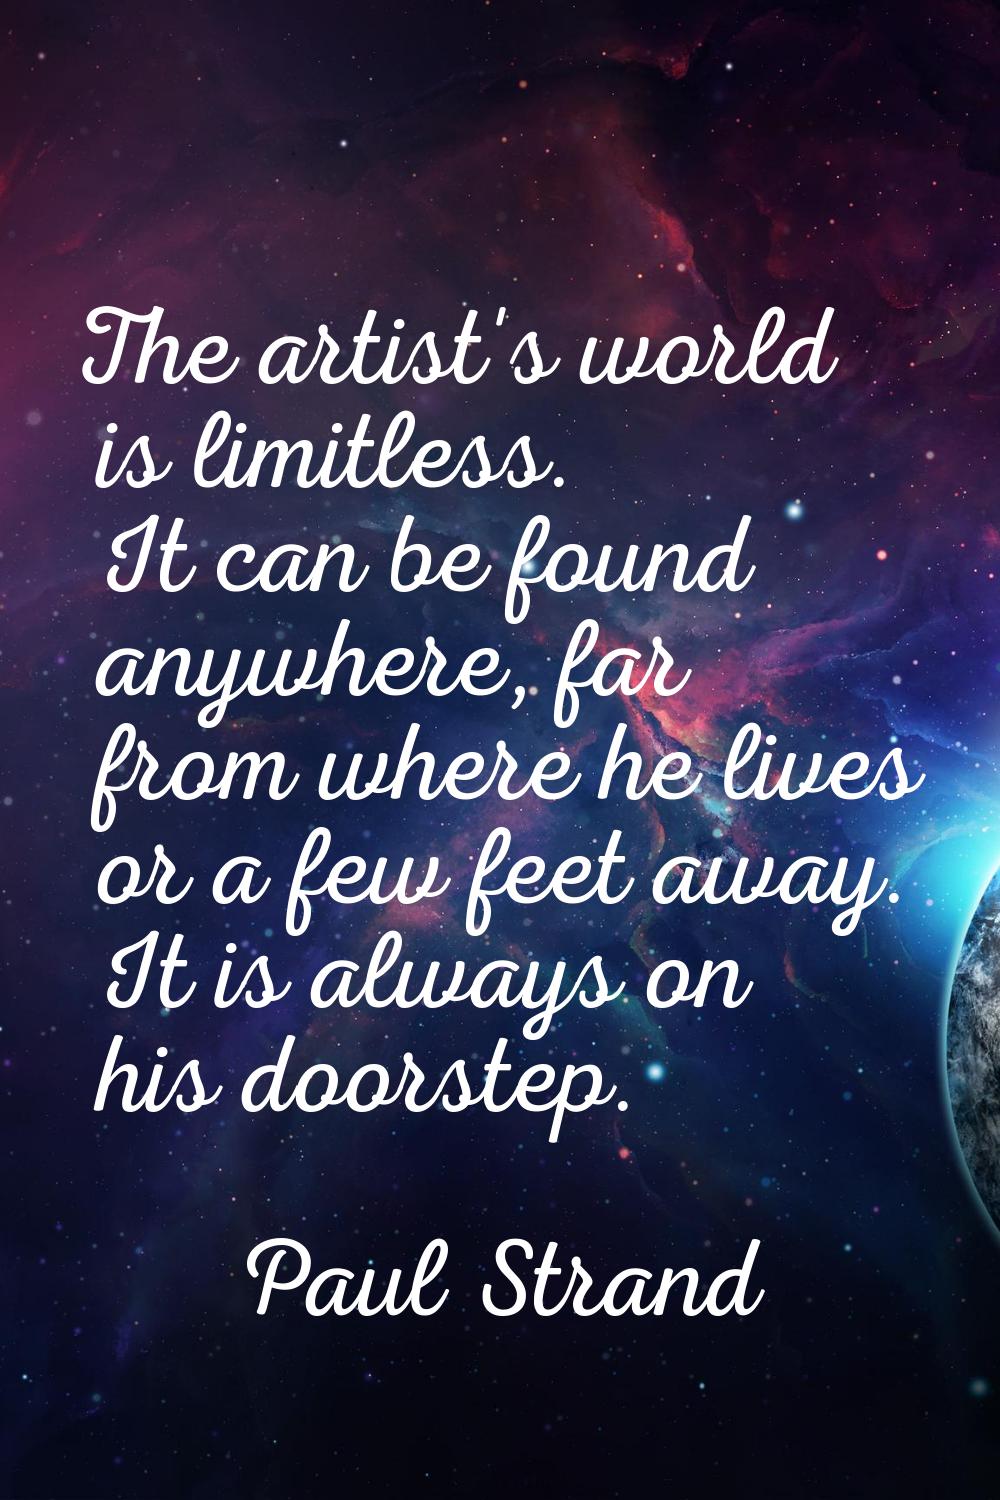 The artist's world is limitless. It can be found anywhere, far from where he lives or a few feet aw